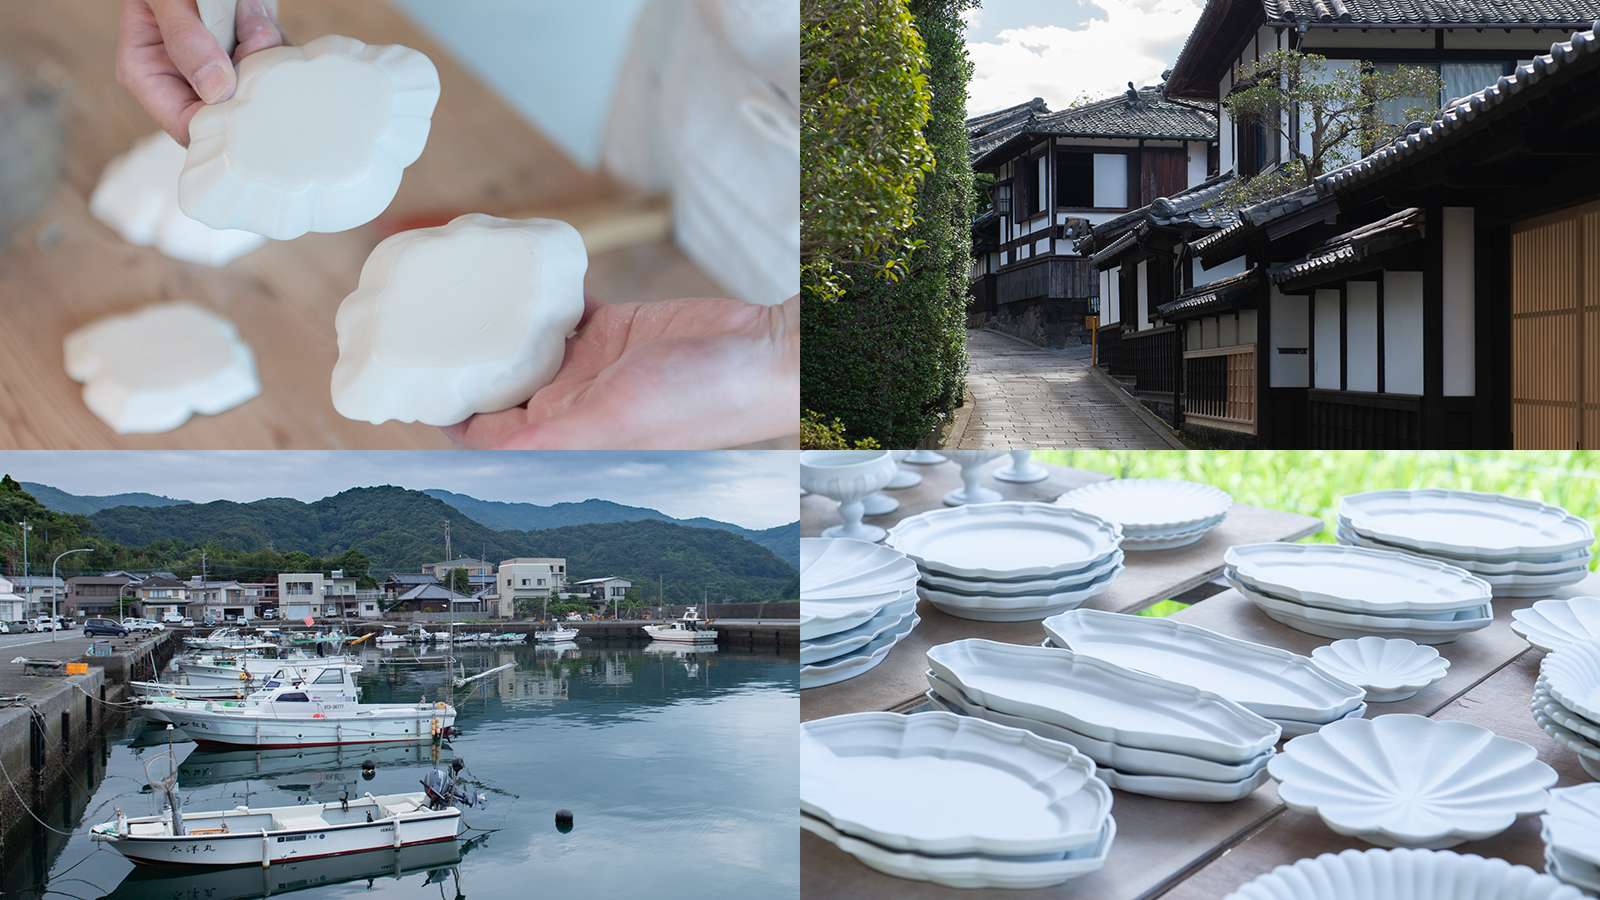 A Day in Usuki: An Unforgettable Journey Through History, Gastronomy, and Art